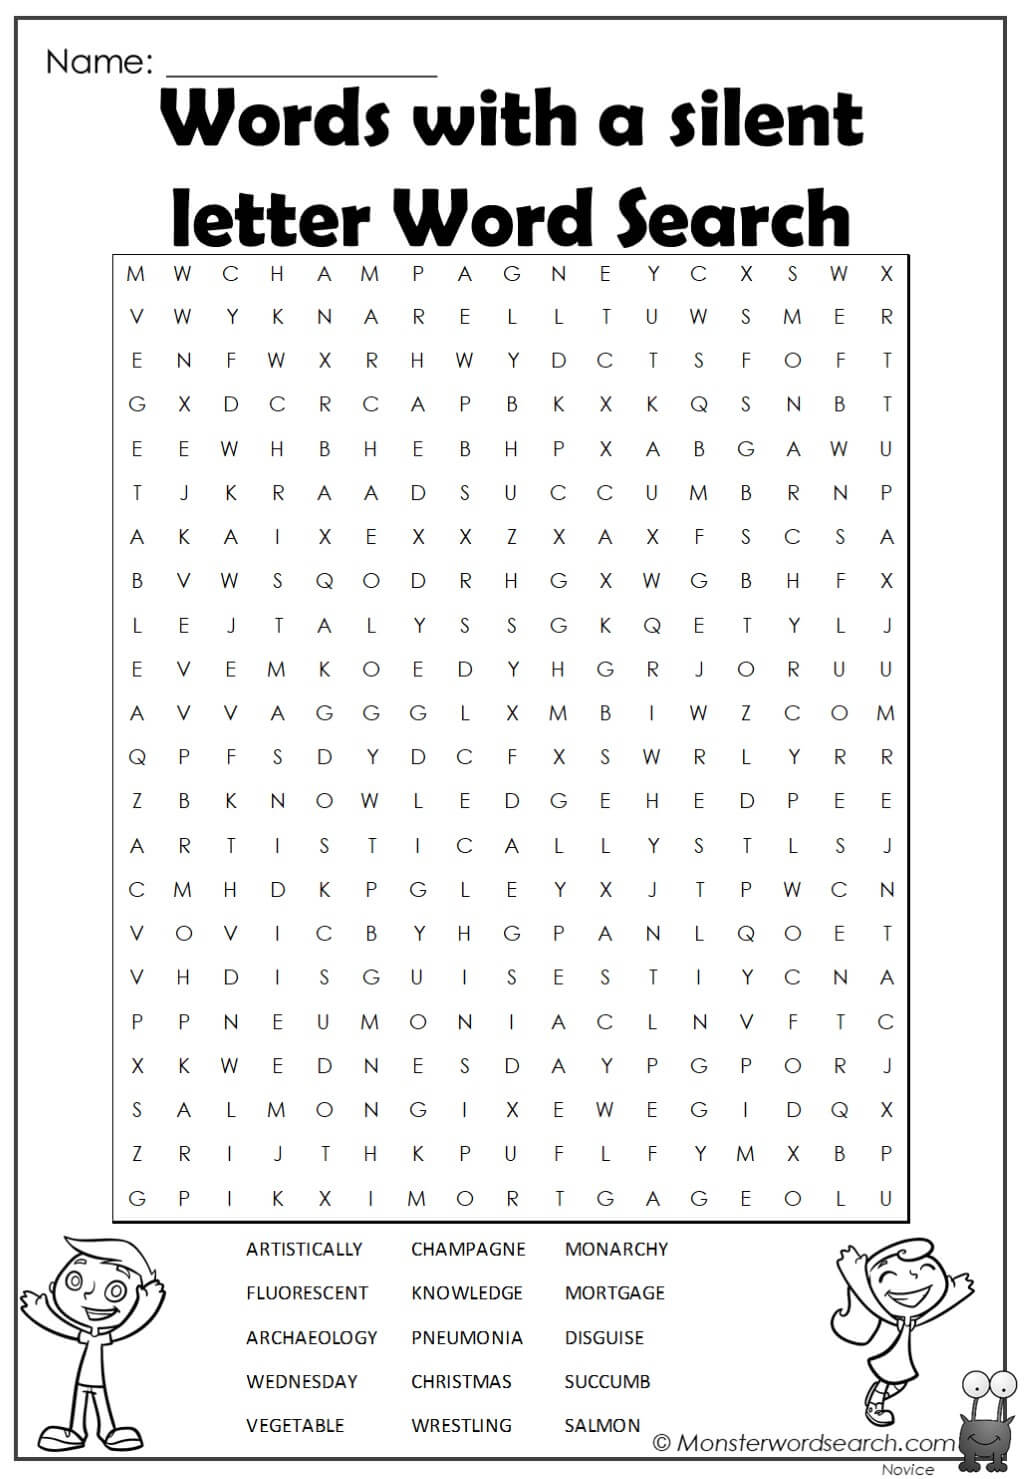 Words-with-a-silent-letter-Word-Search-1.jpg - Monster Word Search